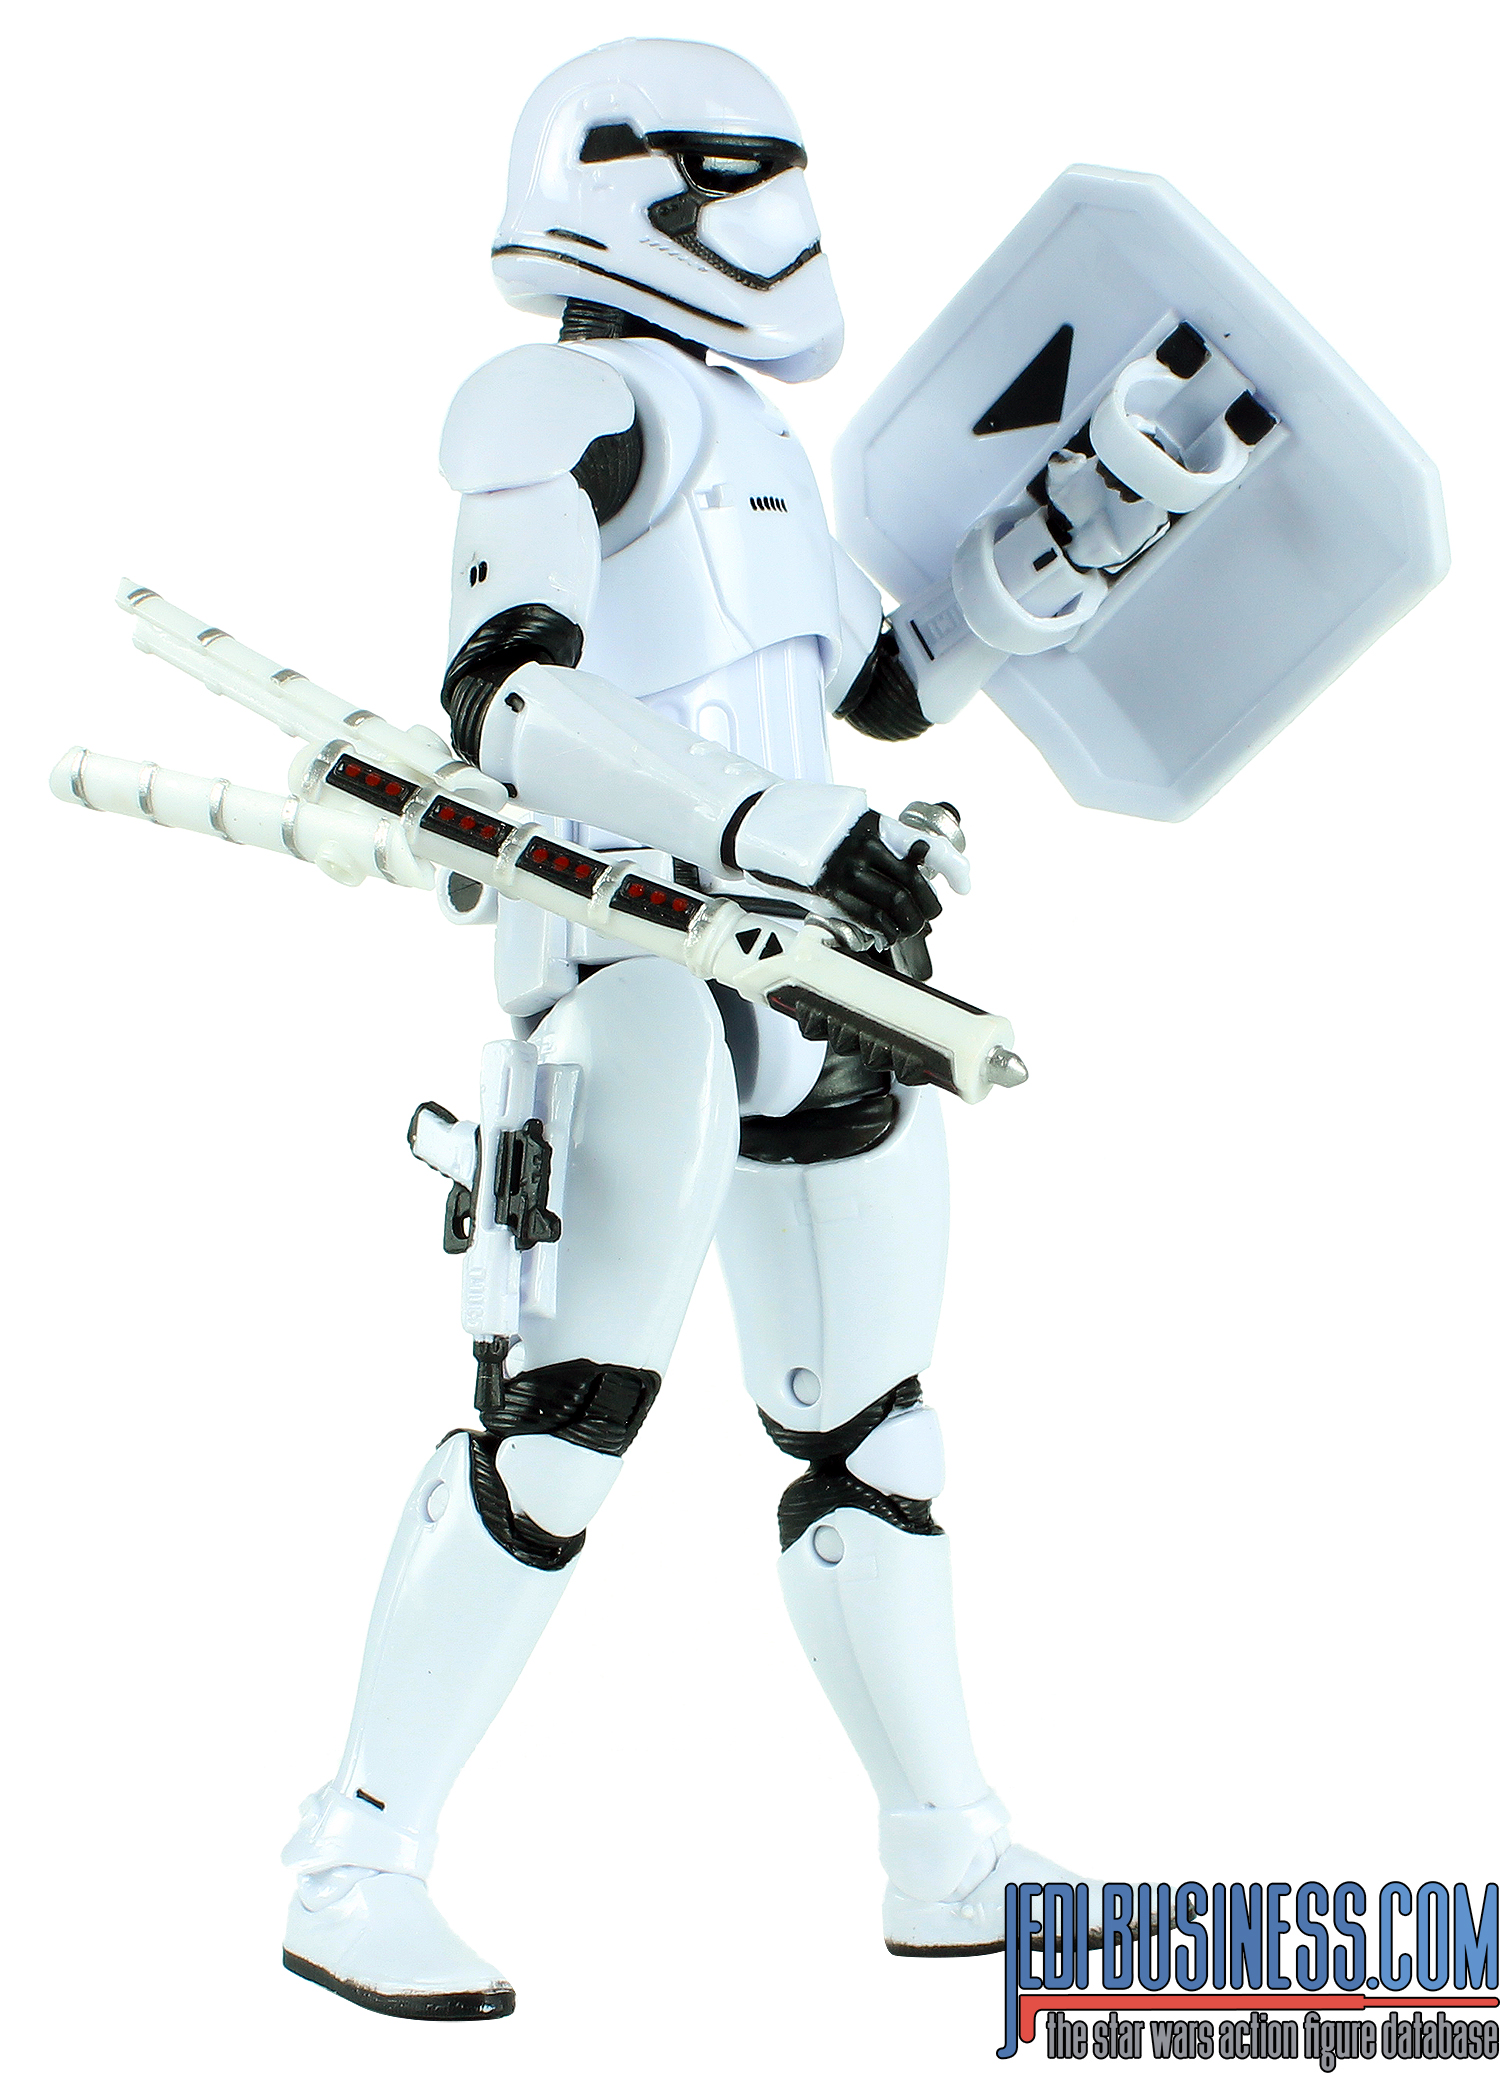 Stormtrooper First Edition